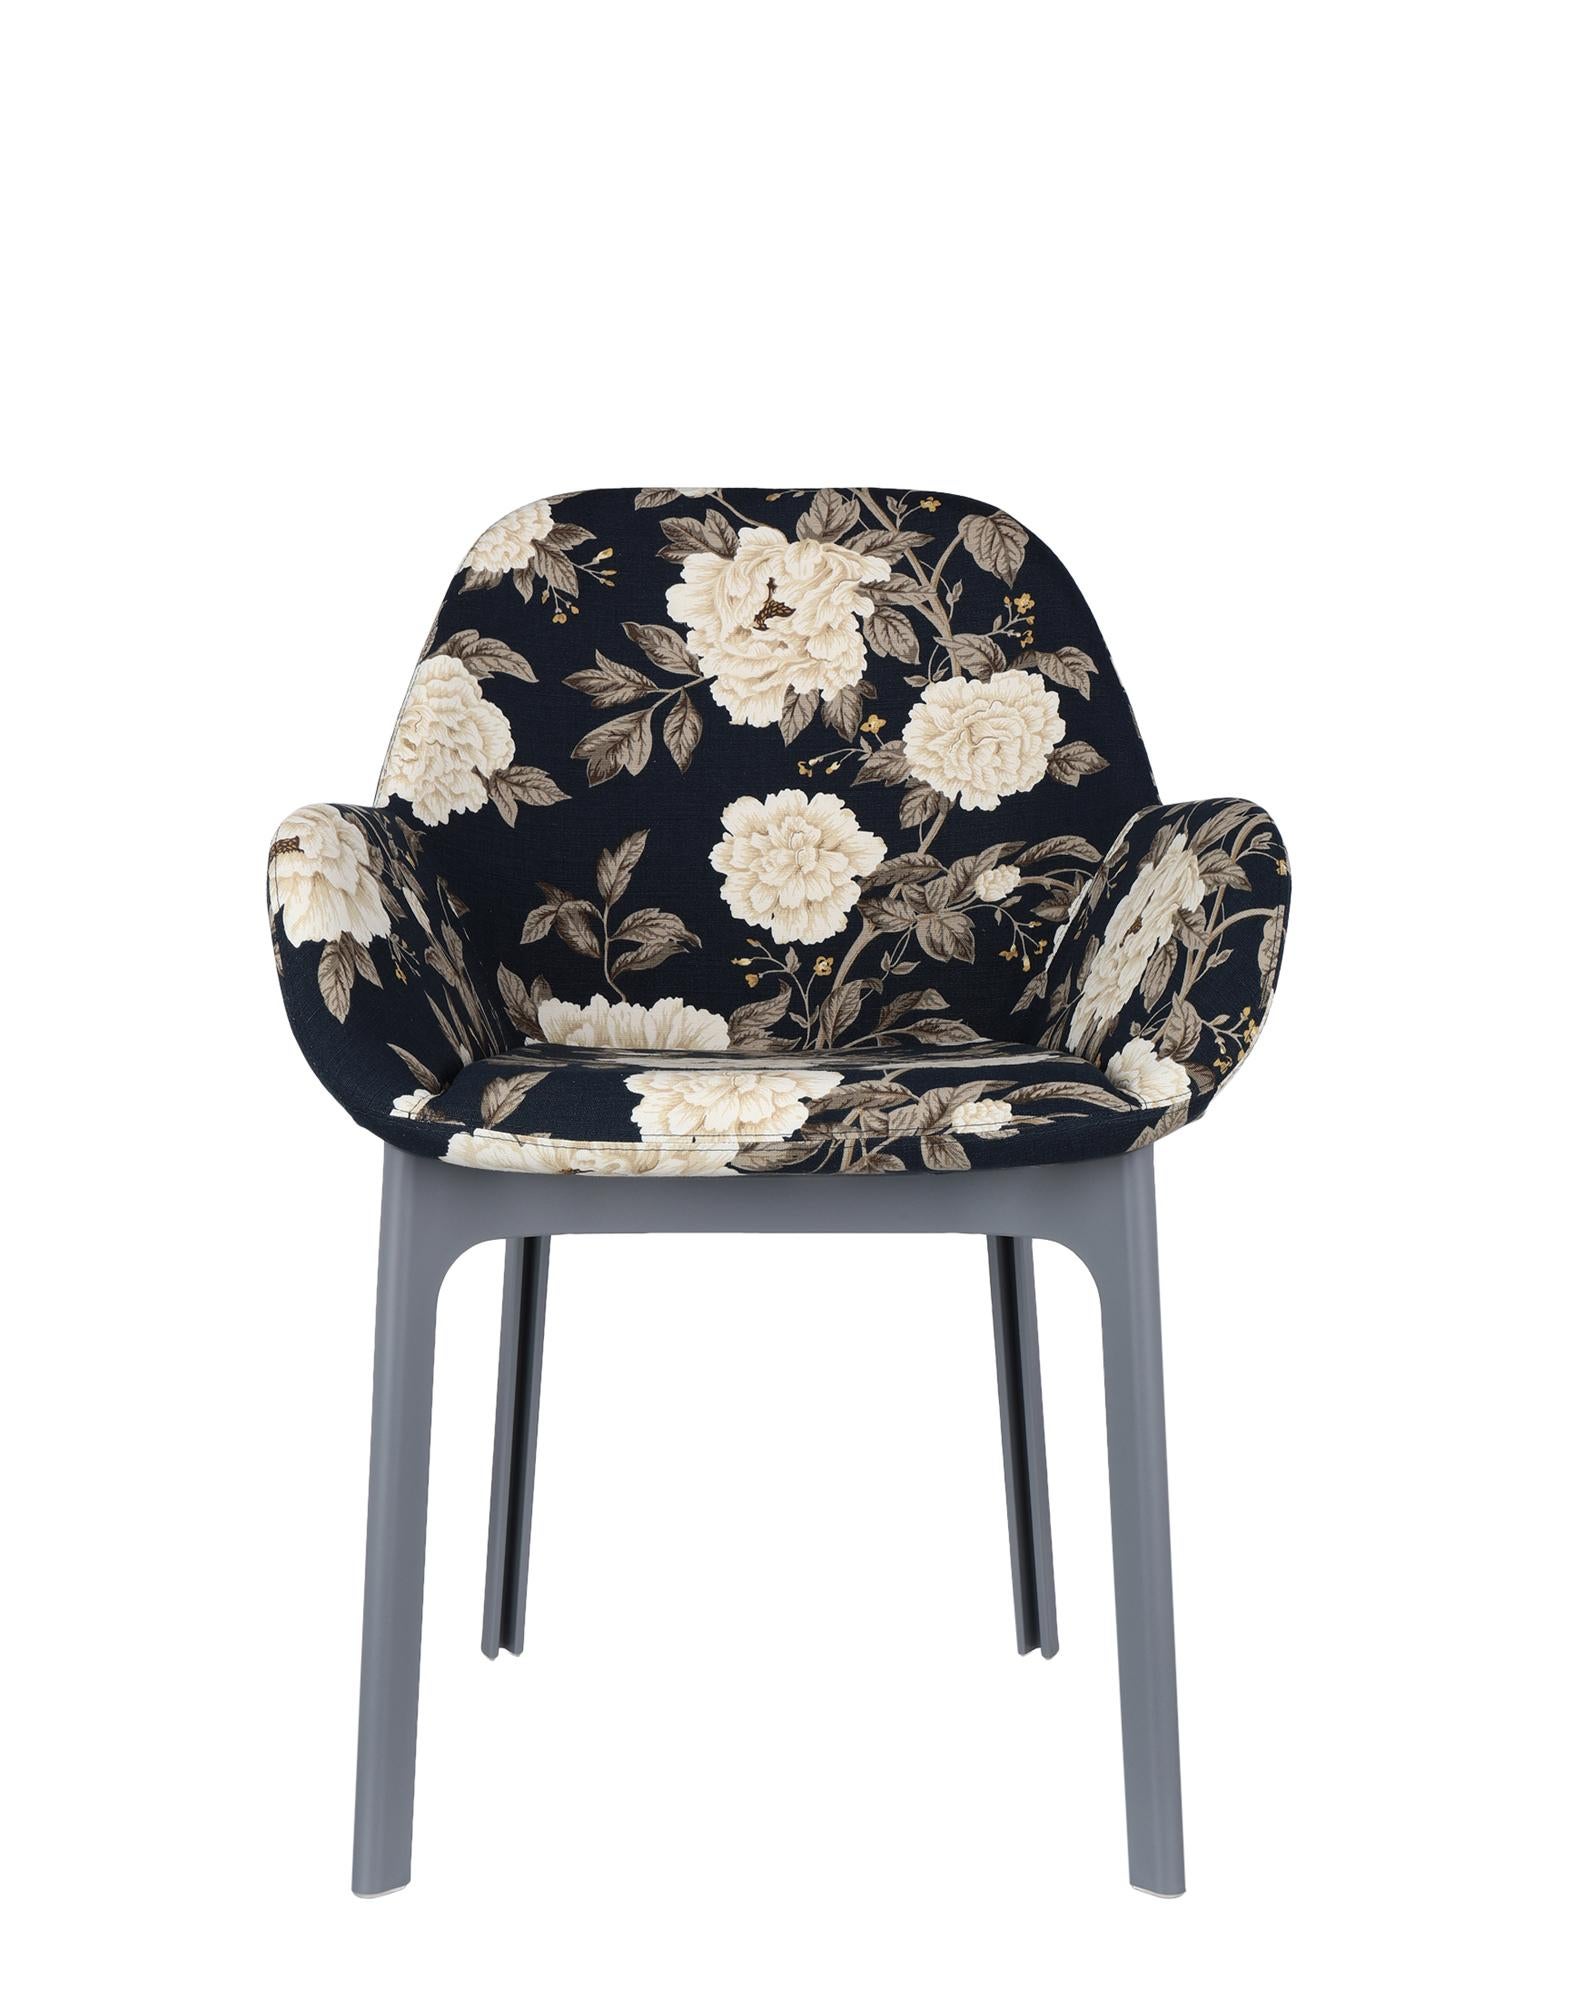 Contemporary Kartell Clap Chair by Patricia Urquiola in Peony Pattern For Sale